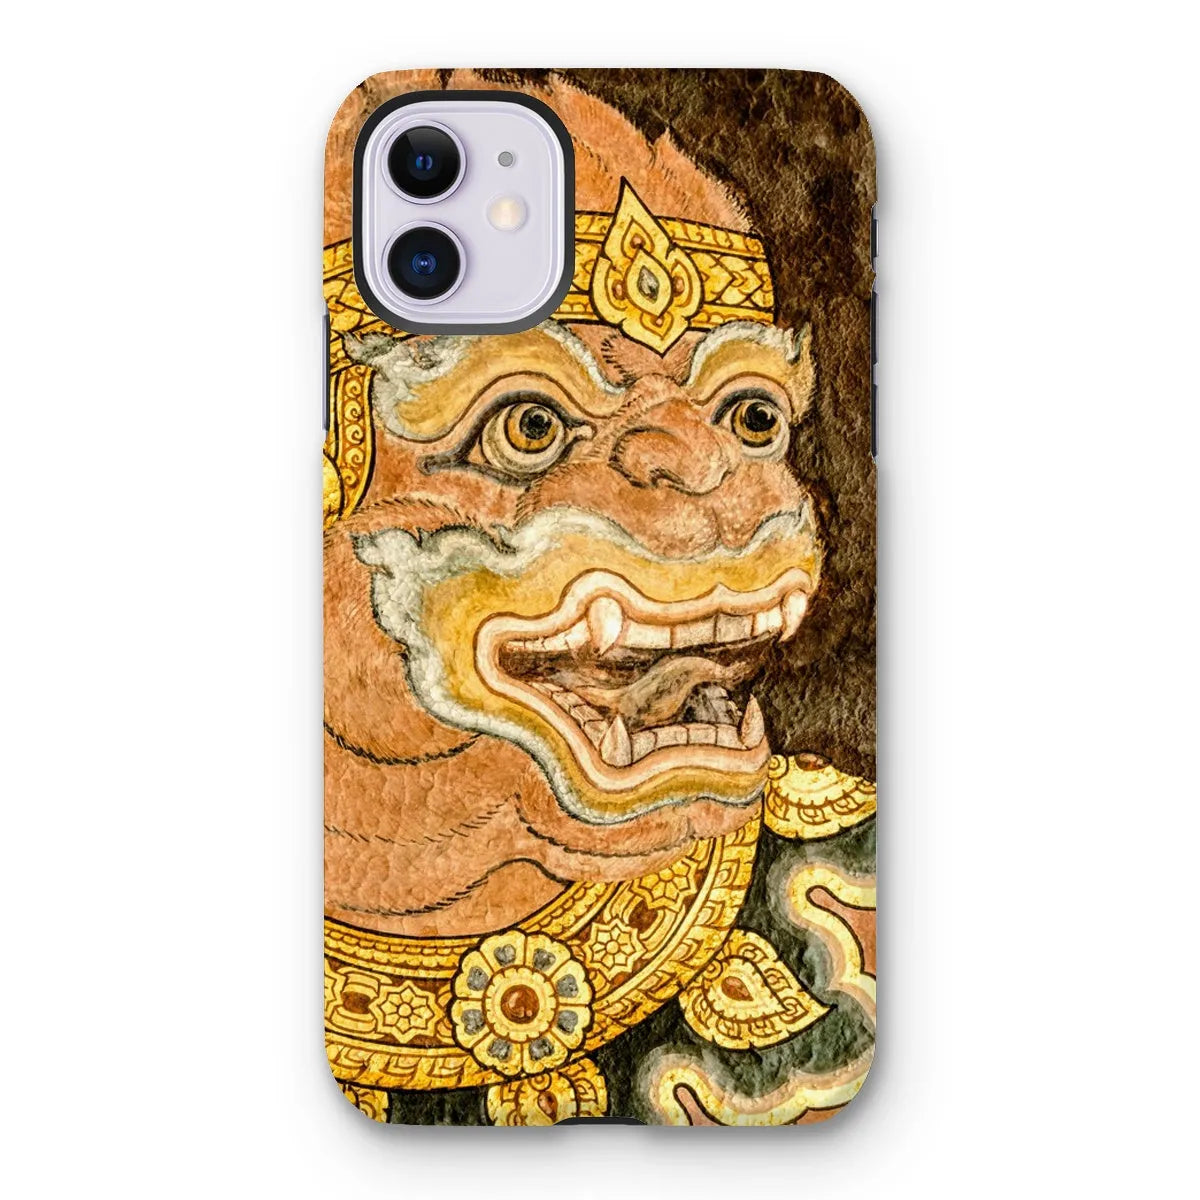 Monkey See - Traditional Thai Aesthetic Art Phone Case - Iphone 11 / Matte - Mobile Phone Cases - Aesthetic Art